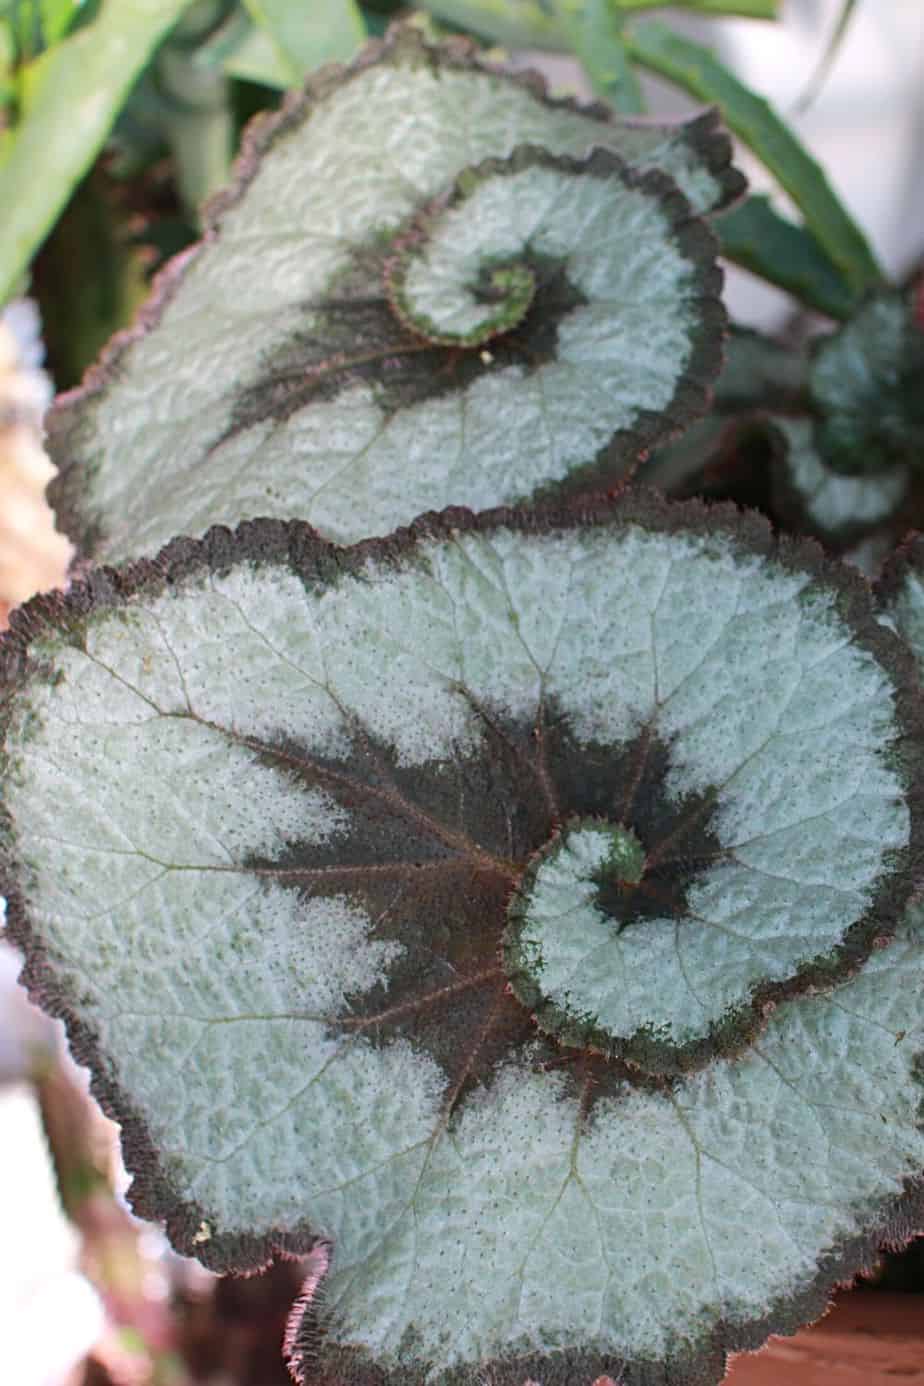 Red begonia also has stunning foliage that can easily beautify your northeast-facing window